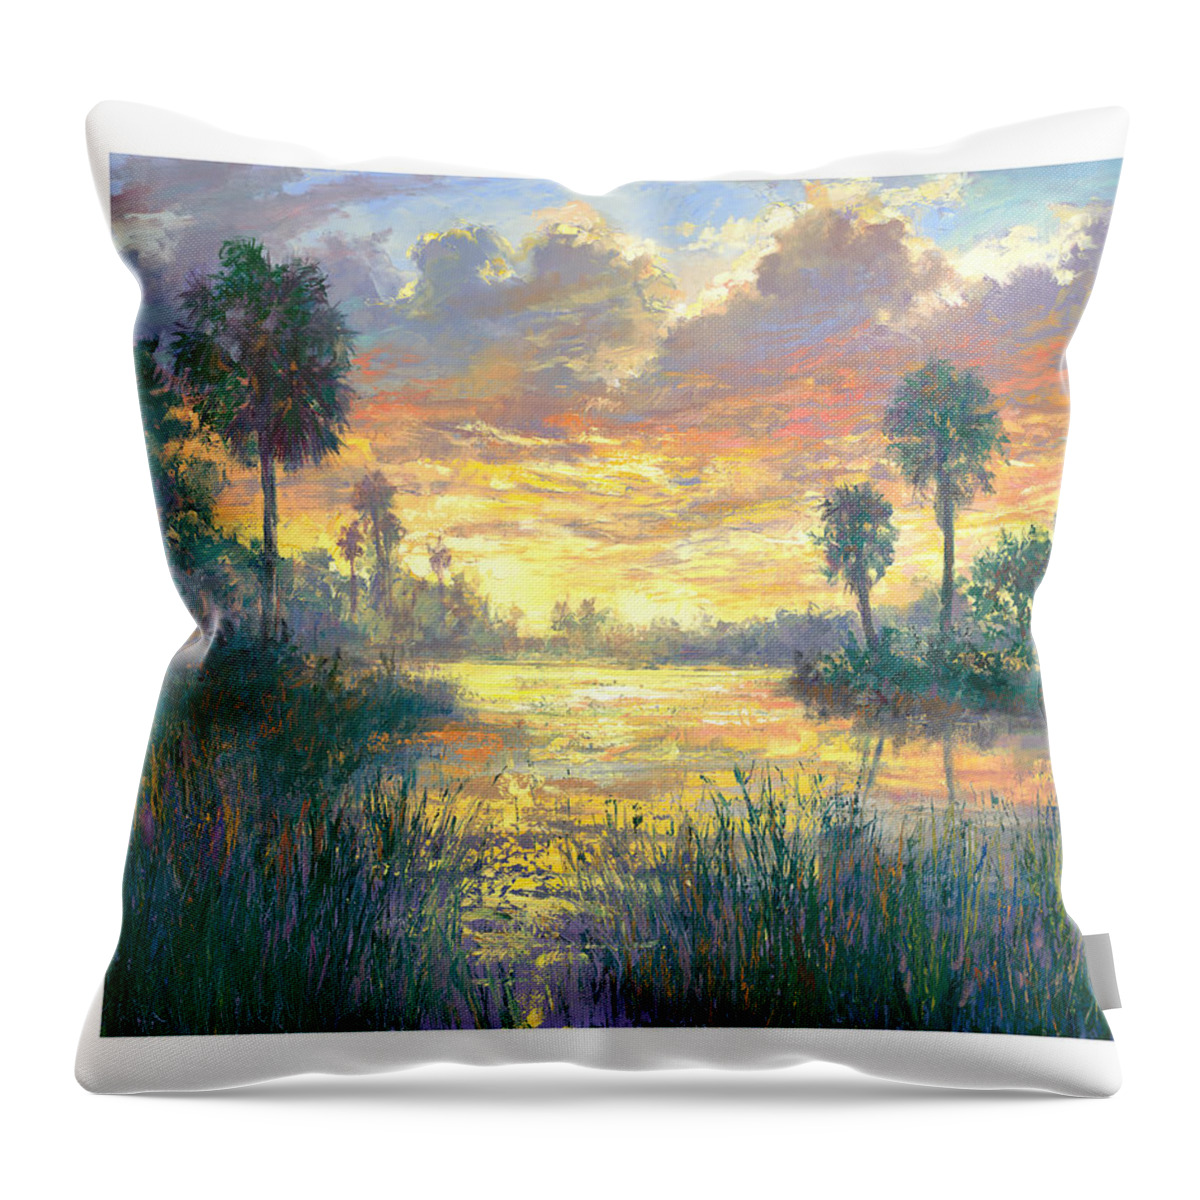 Everglades Throw Pillow featuring the painting Everglades Sunrise cropd by Laurie Snow Hein